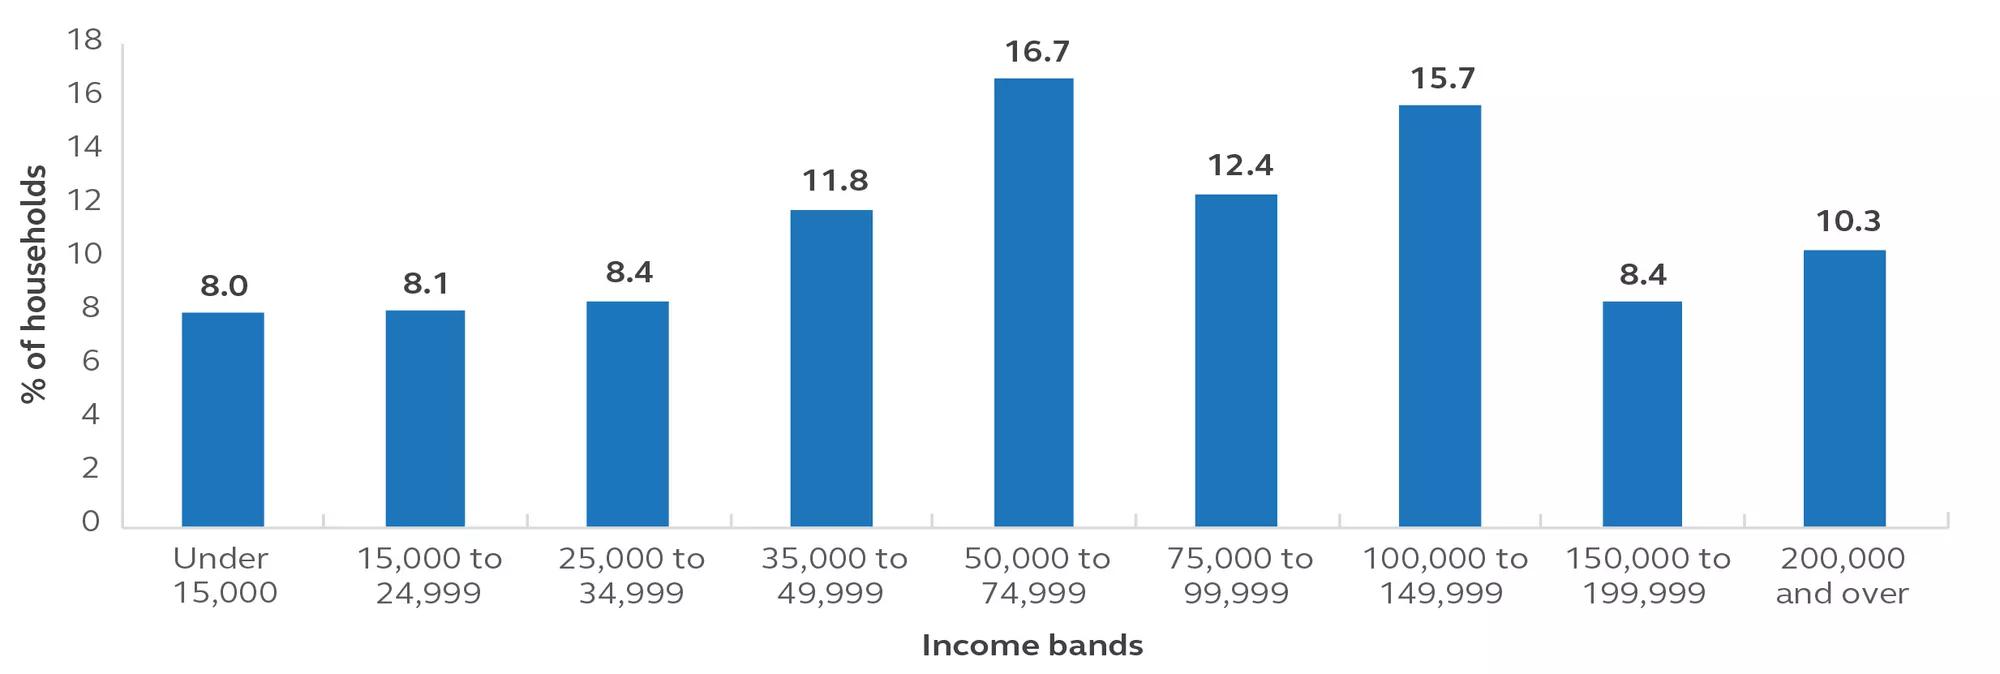 Bar chart showing percentages of annual household income in U.S. dollars segmented by income bands